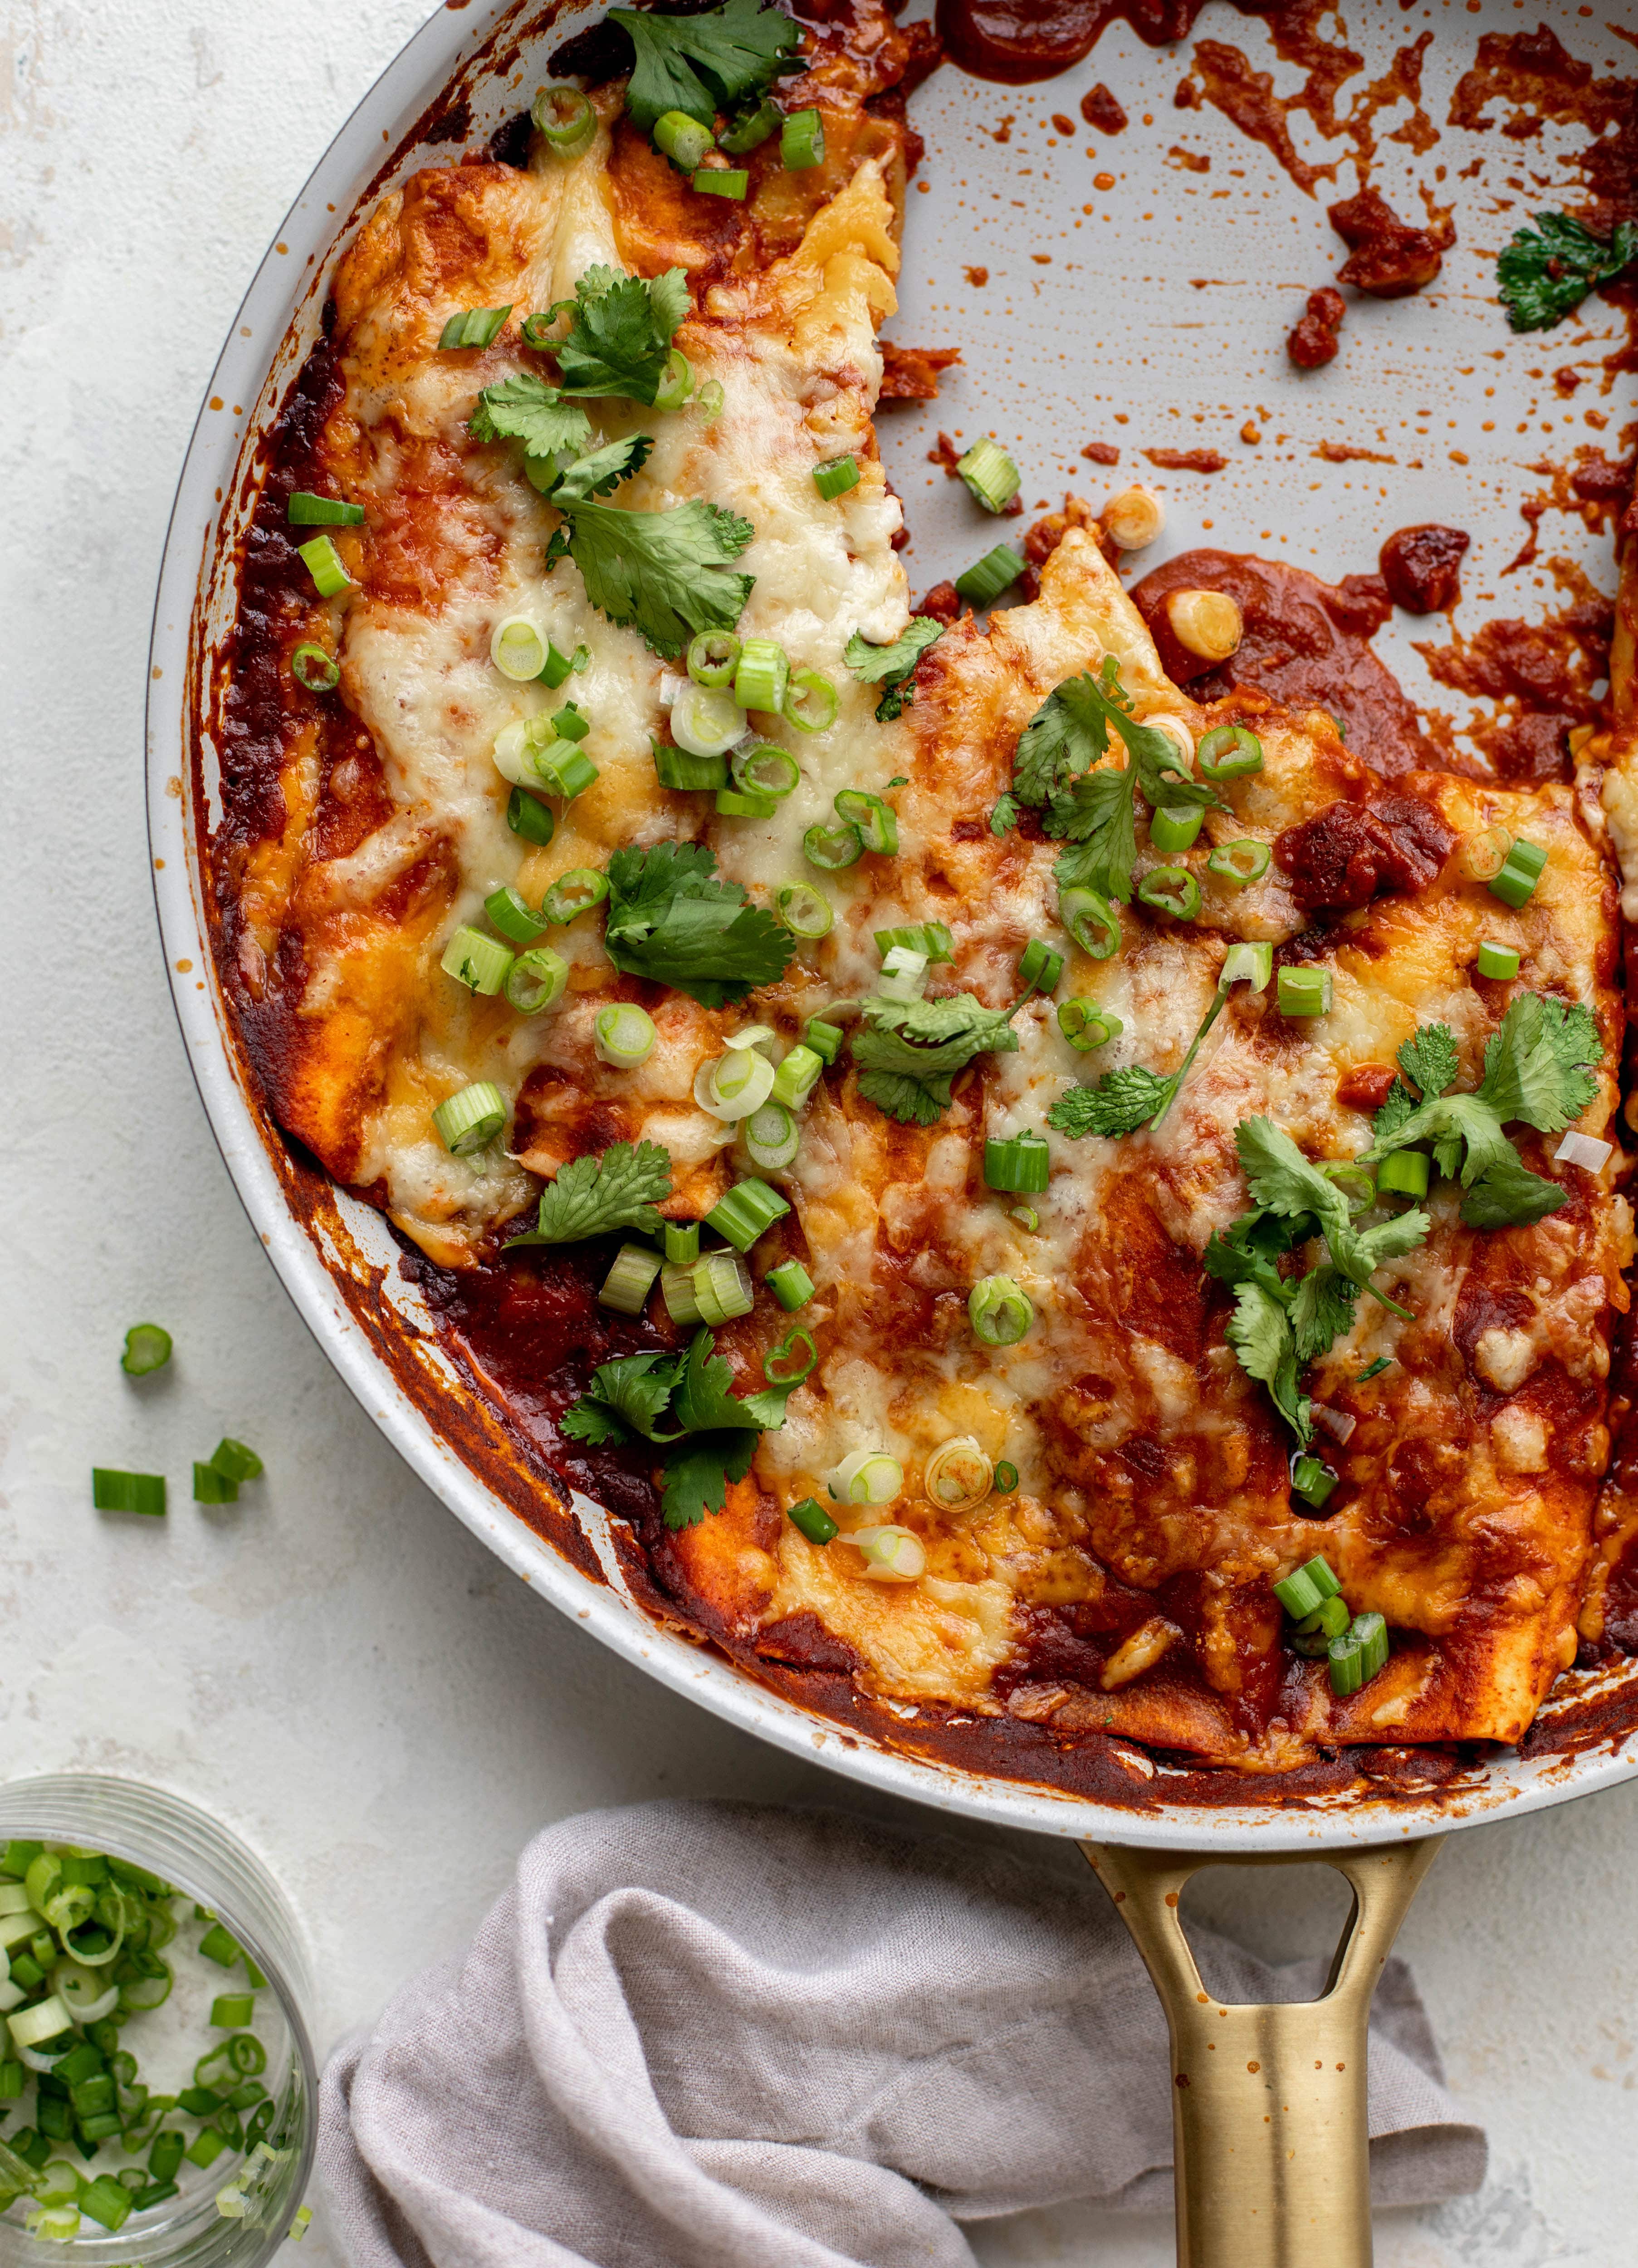 Chipotle chicken skillet enchiladas are loaded with flavor and come together so quickly! They are the perfect spicy weeknight meal.